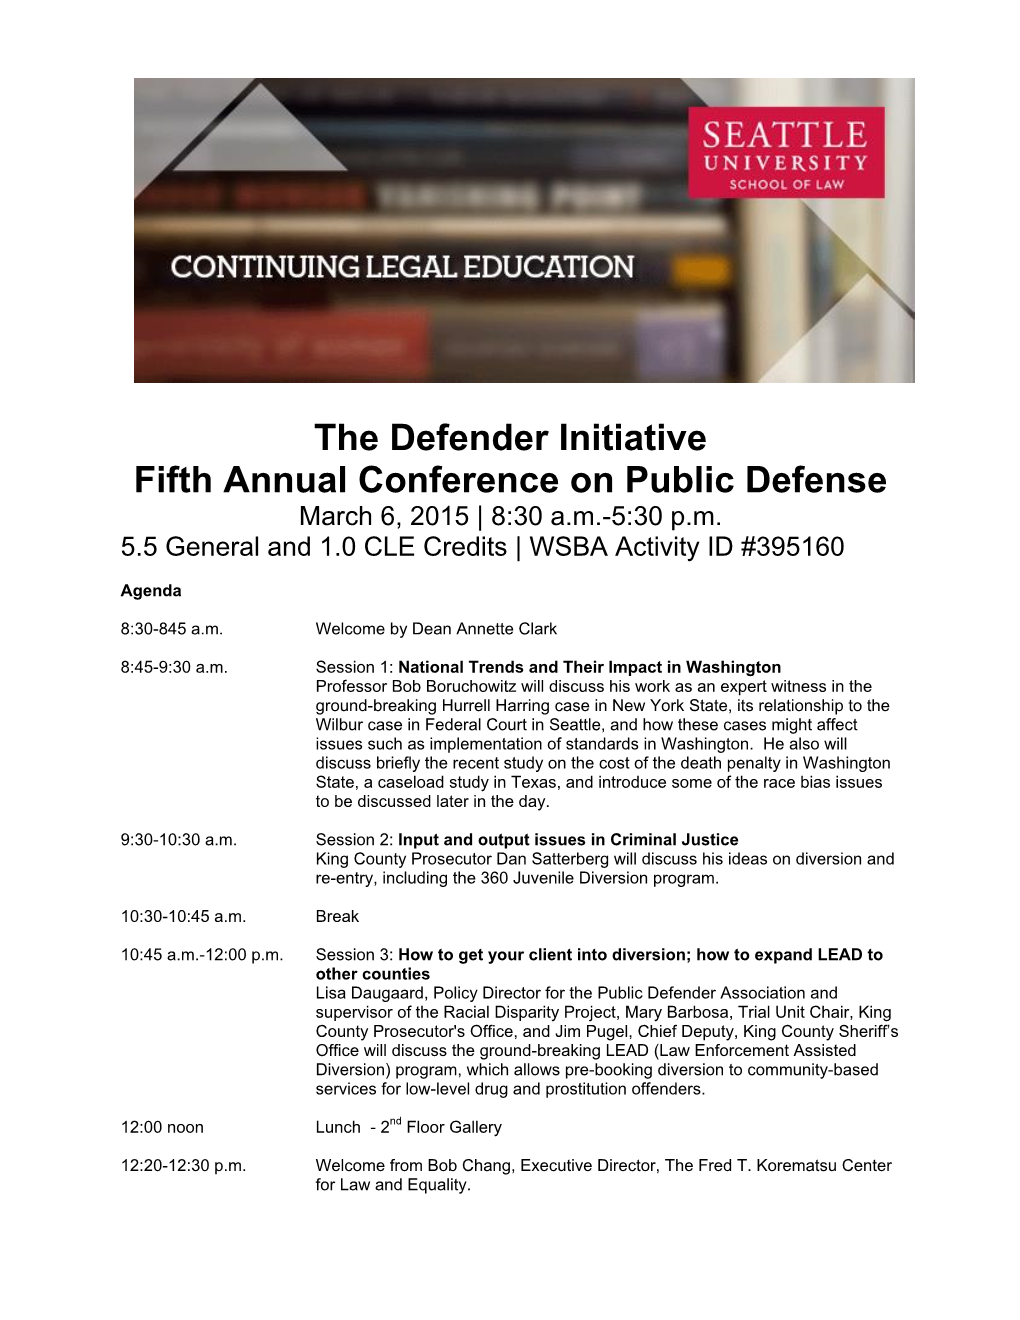 The Defender Initiative Fifth Annual Conference on Public Defense March 6, 2015 | 8:30 A.M.-5:30 P.M